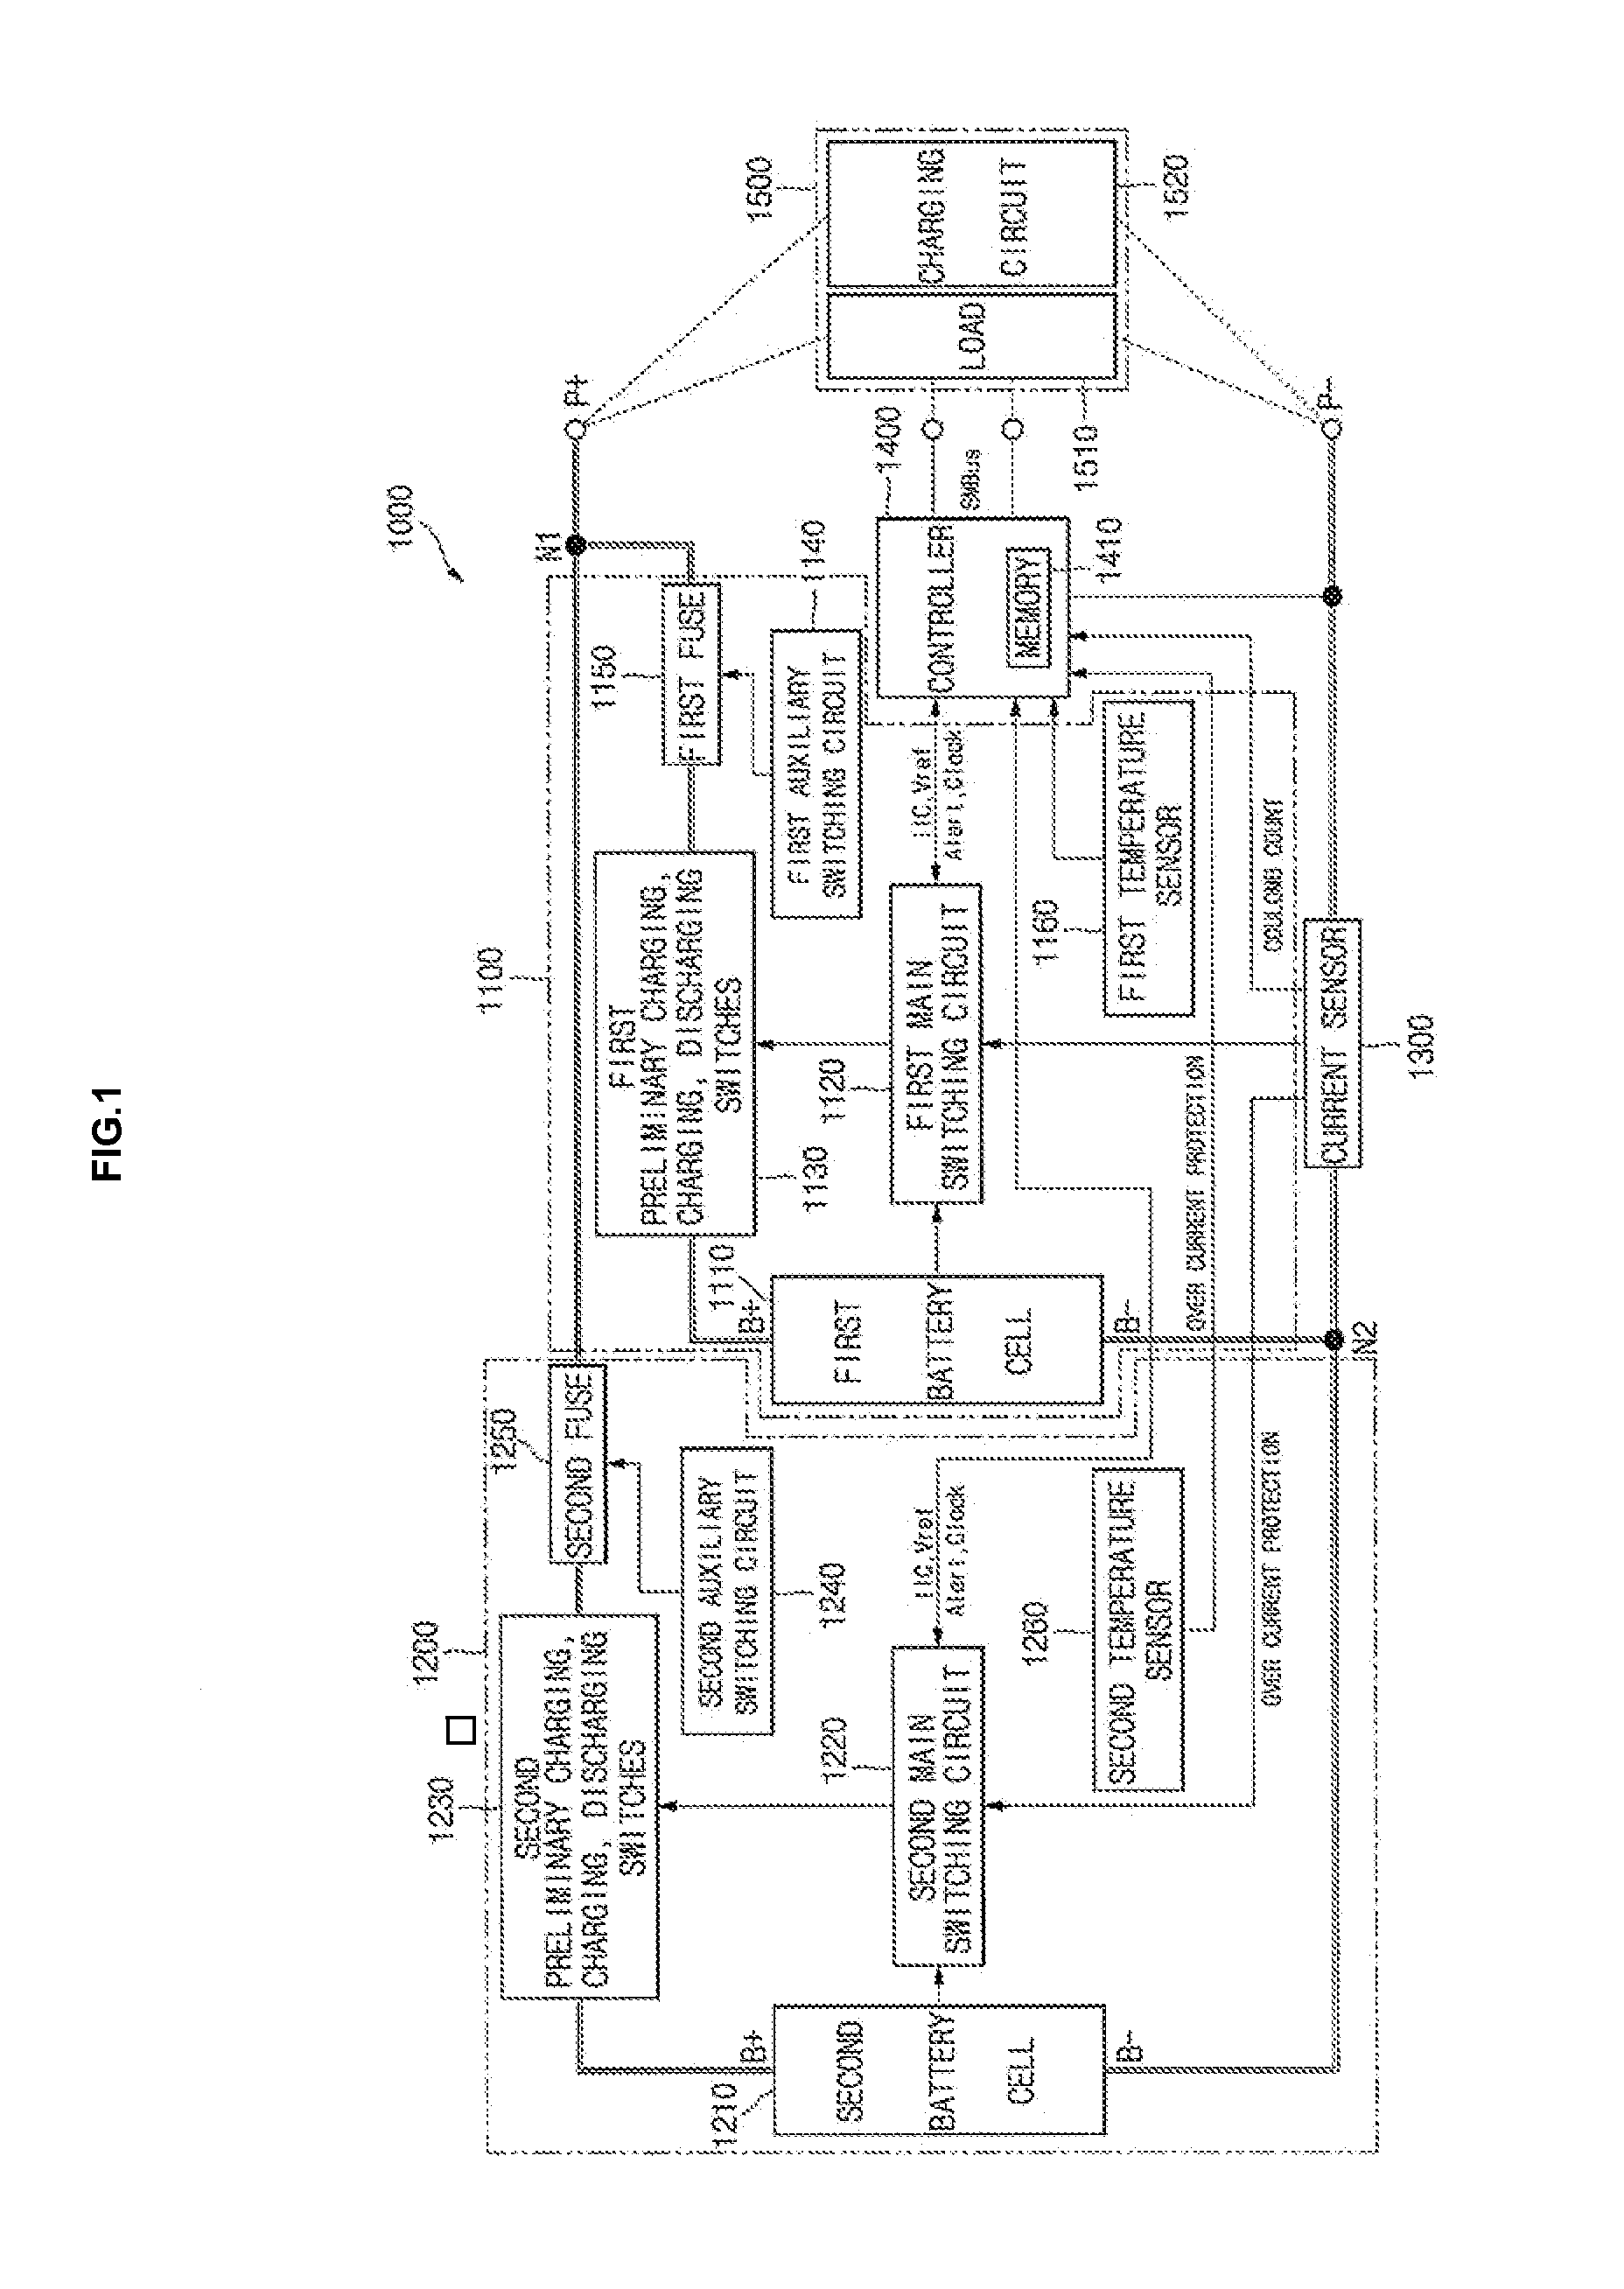 Hybrid battery pack and methods of charging and discharging the same